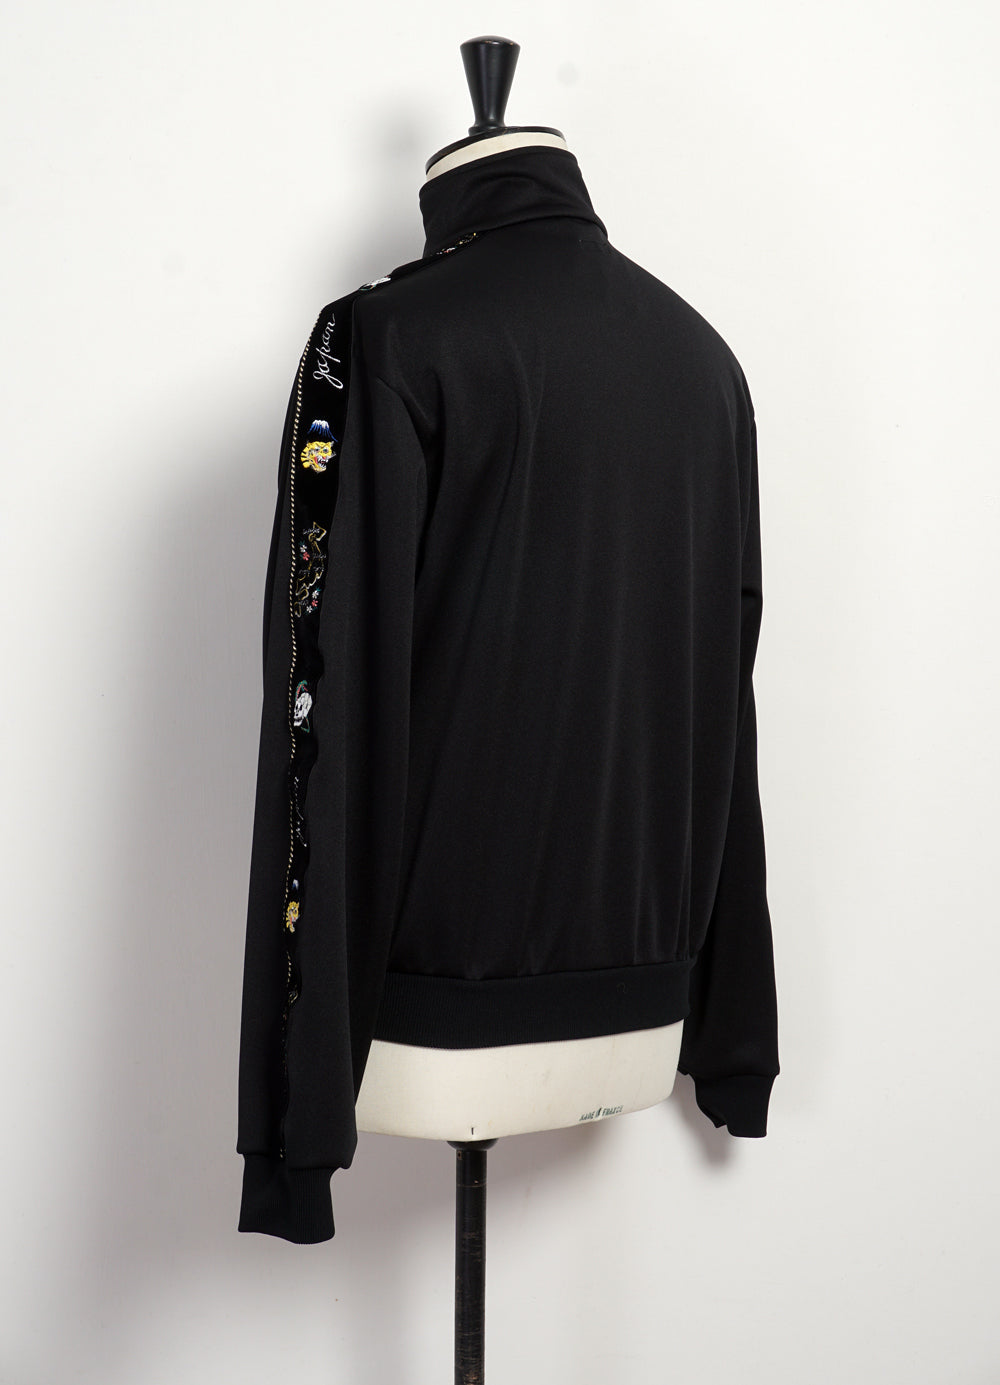 Chaqueta Deportiva Negra Concealed Tape Track